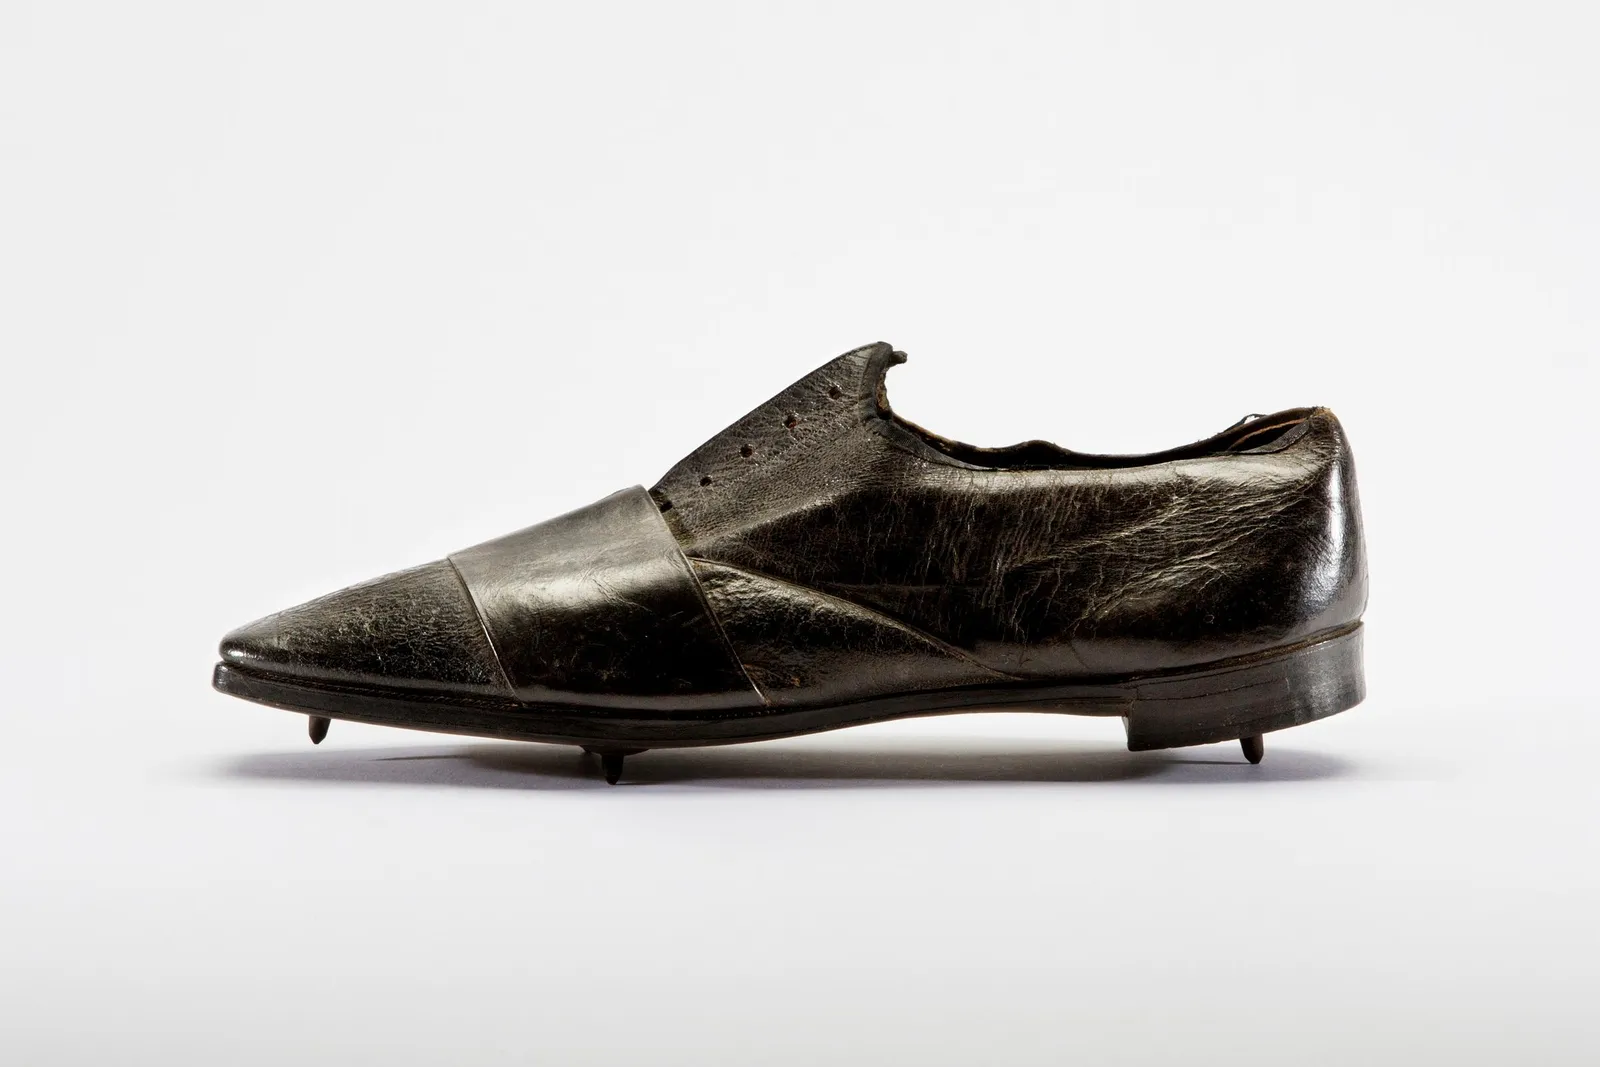 Running Shoes Date Back to the 1860s, and Other Revelations From the  Brooklyn Museum's Sneaker Show | Travel| Smithsonian Magazine